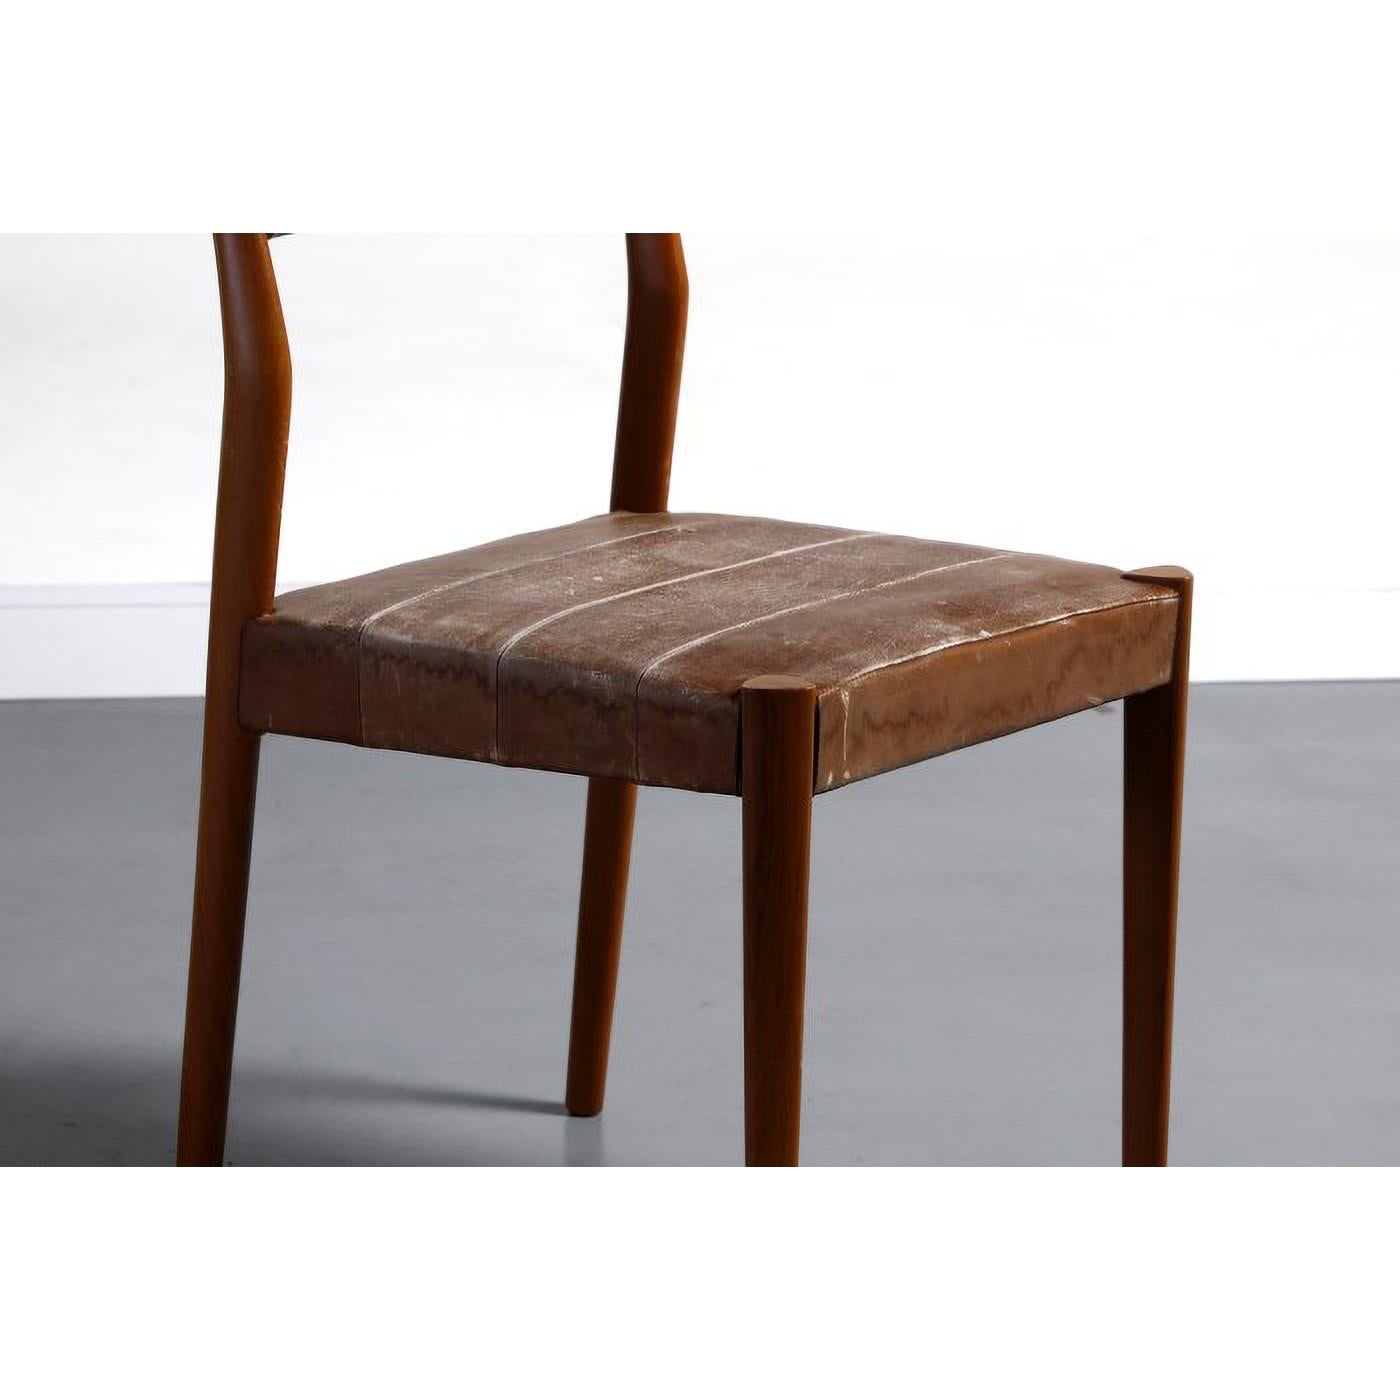 Mid-Century Modern 4 Chairs by Moller Niels Leather from Mollers Mobel Fabrik, Denmark 60s